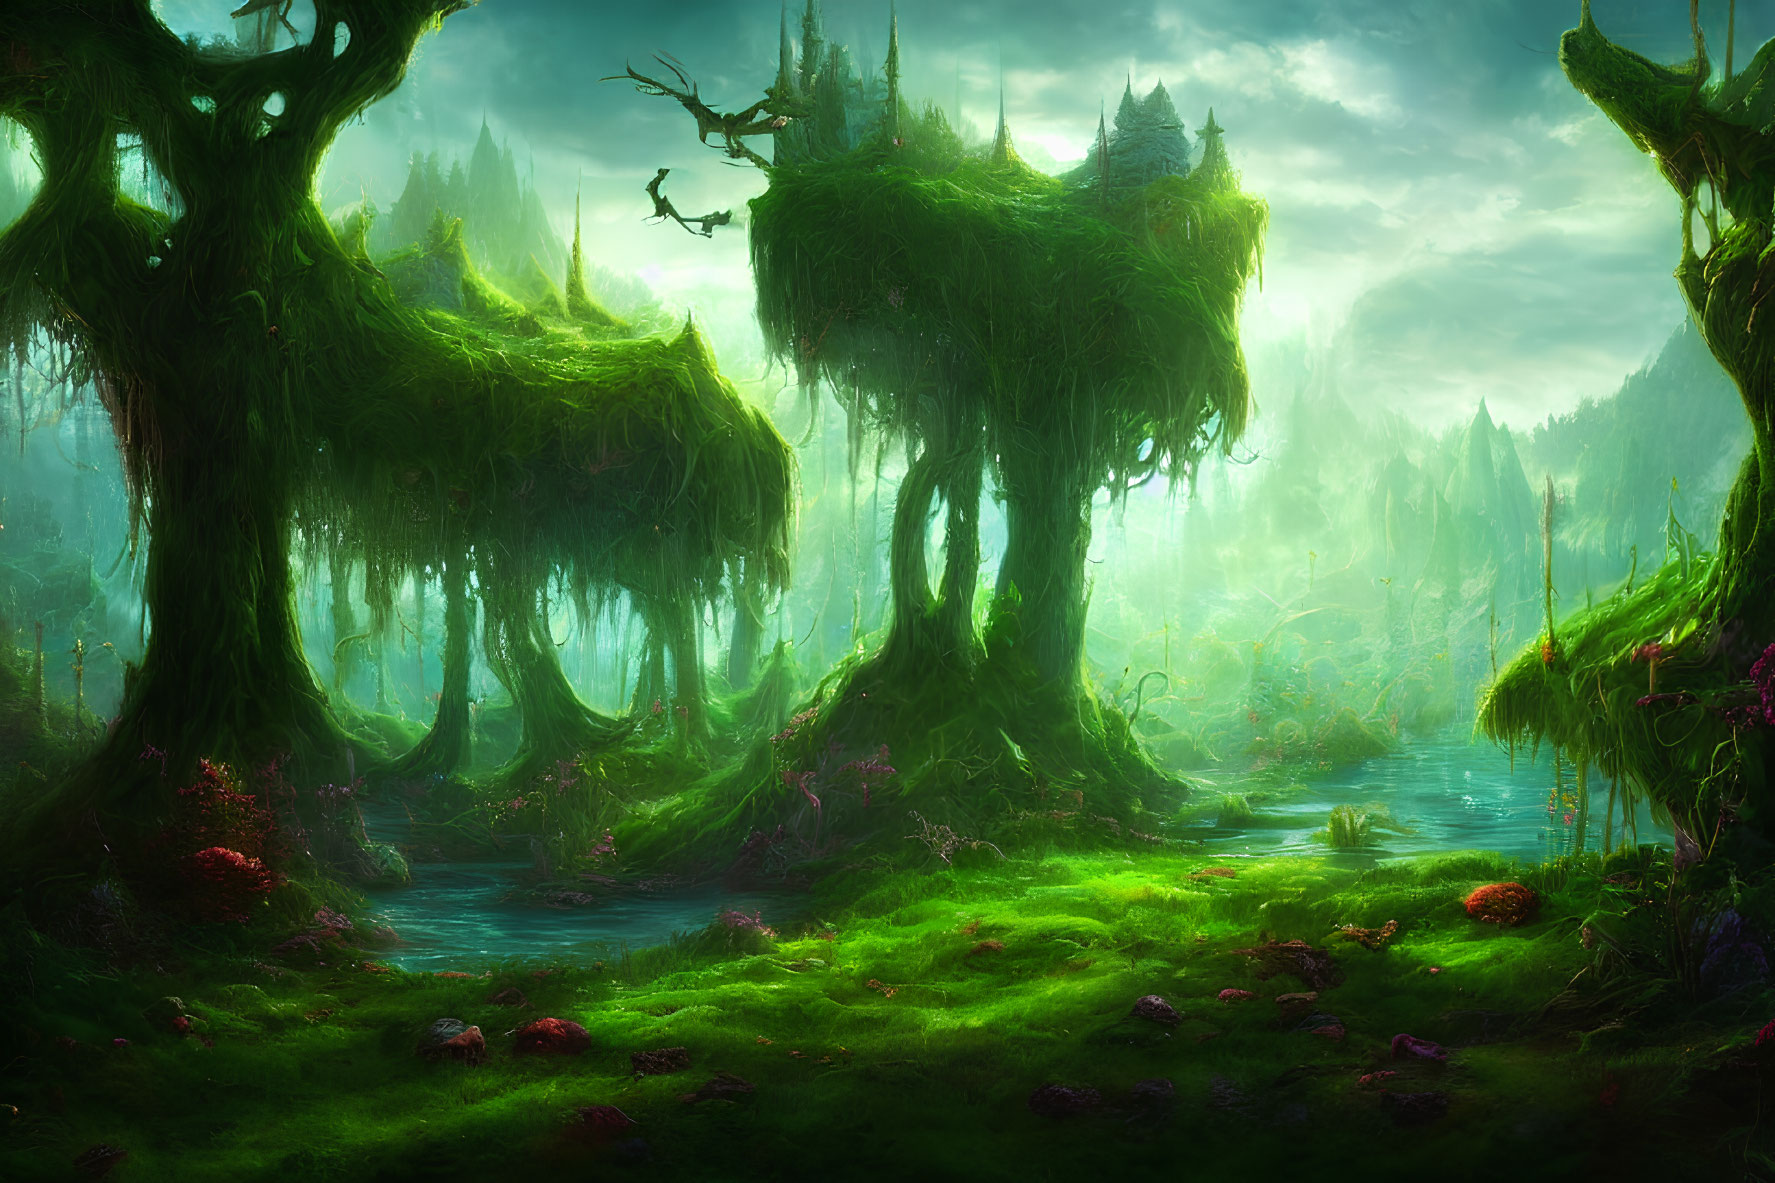 Ethereal green forest with moss-covered trees and serene river